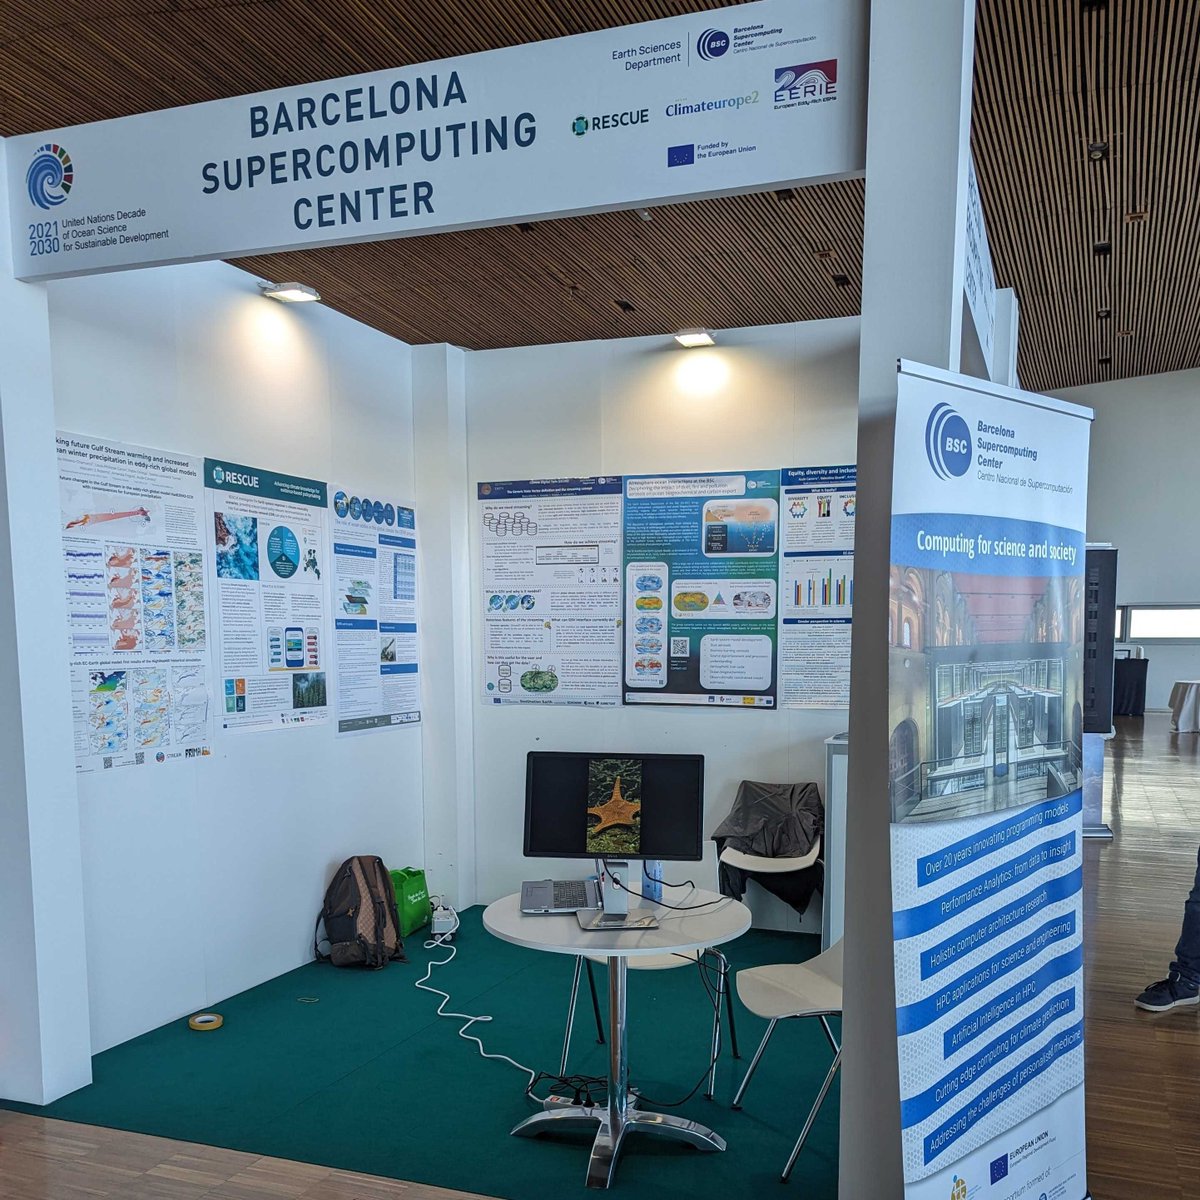 RESCUE is at the @UNOceanDecade Conference! Come speak to us at the @BSC_CNS booth no. 11 to learn more about our project and our research on #CDR and #climate neutrality!